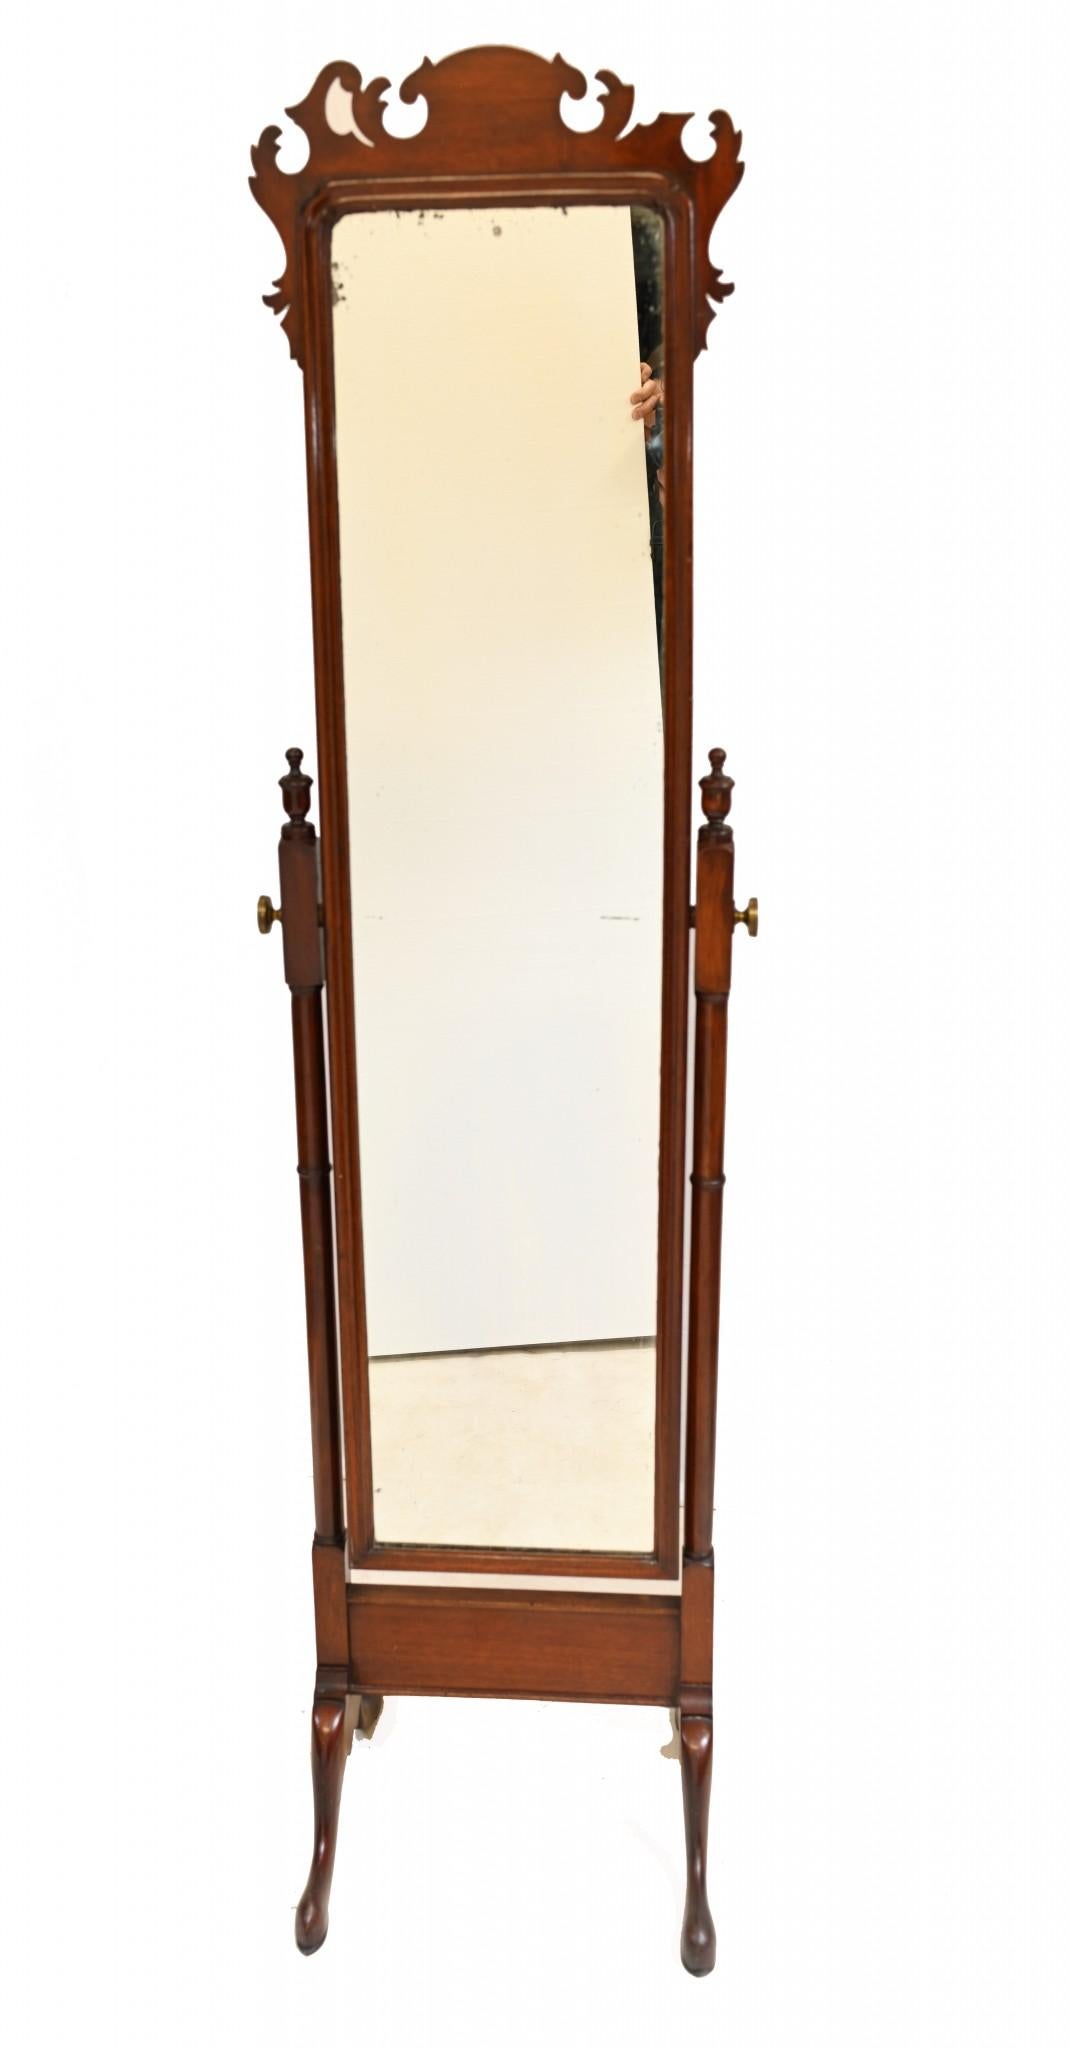 Gorgeous Georgian style mahogany cheval mirror
We date this quirky interiors piece to circa 1890
Great full length mirror that won't take up the whole room as it's quite a narrow one
Offered in great shape ready for home use right away
We ship to